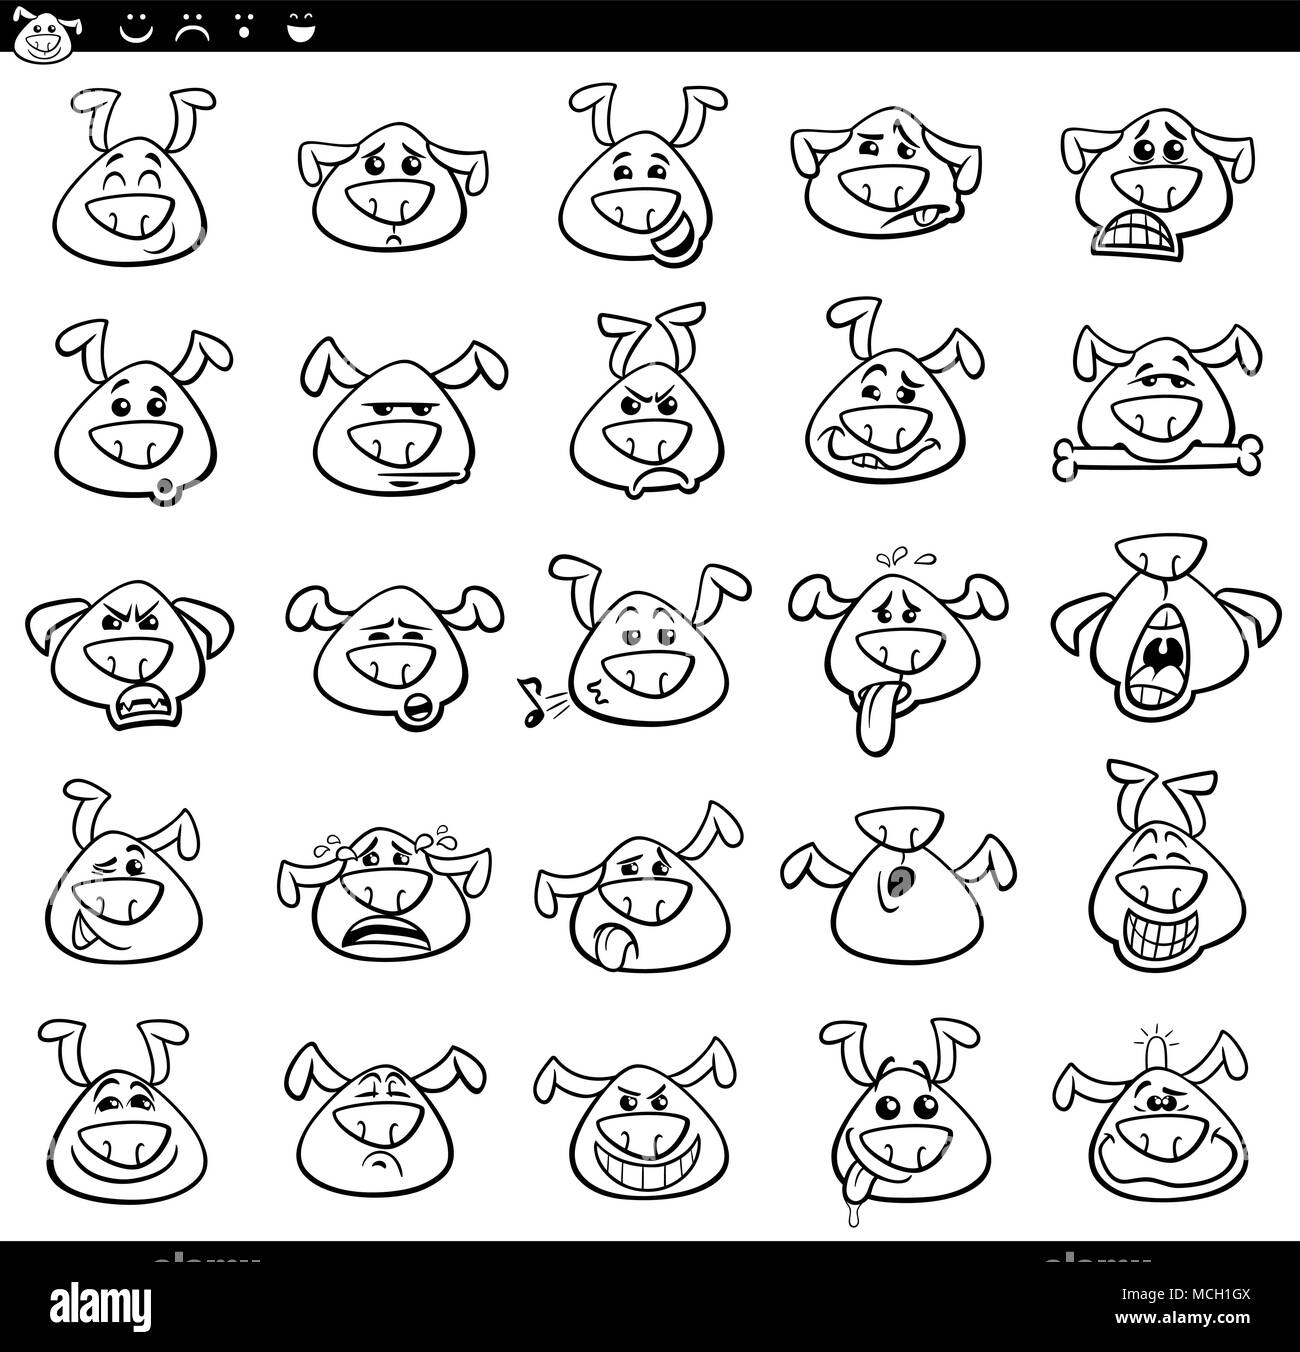 Black and White Cartoon Illustration of Funny Dogs Expressing Emotions or Emoji Icons Set Stock Vector